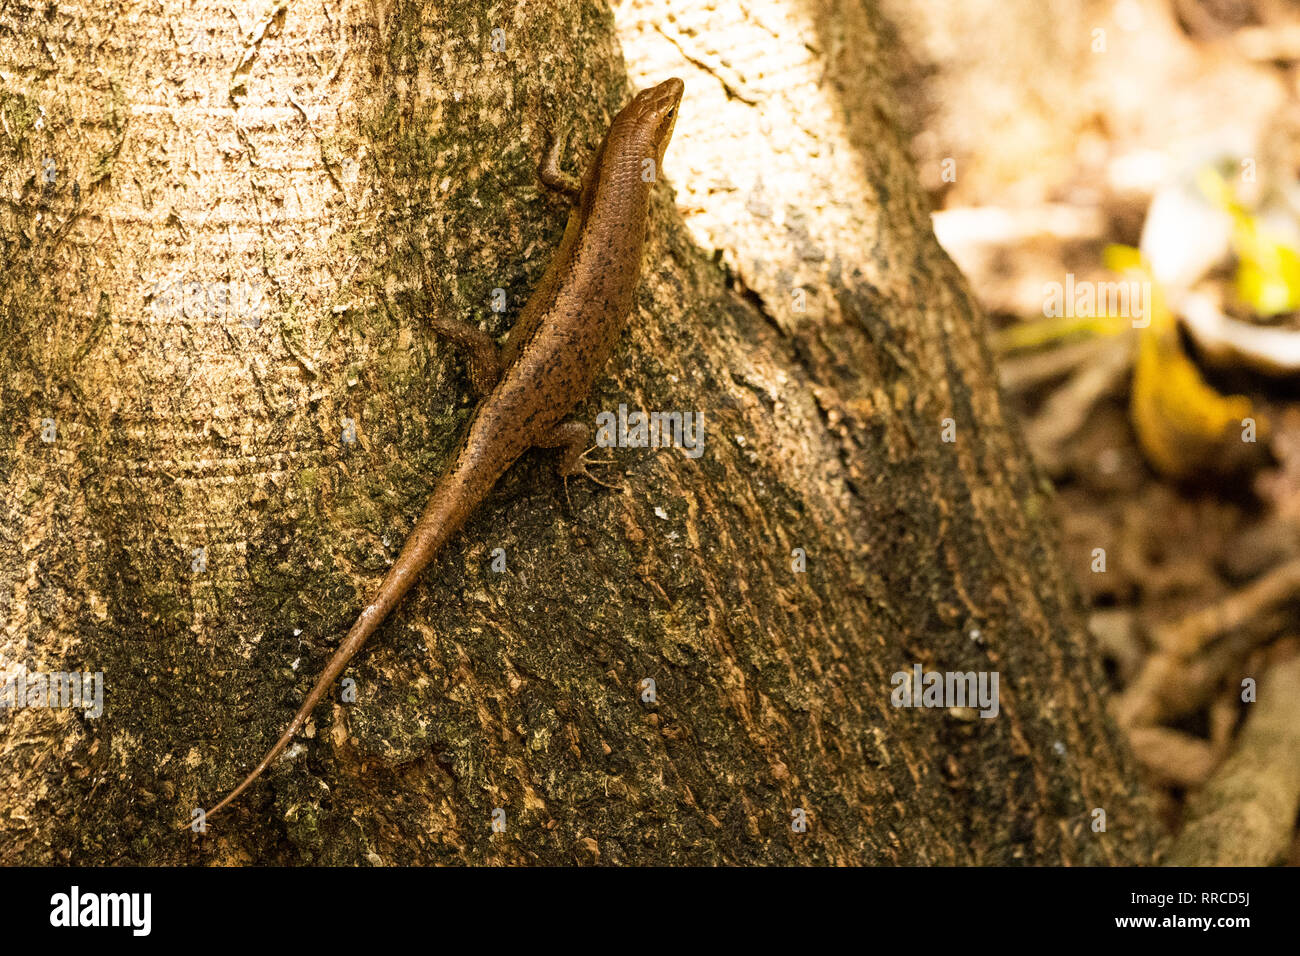 The Seychelles skink (Trachylepis seychellensis) is a species of skink in the Scincidae family. It is endemic to the Seychelles. Photographed in the S Stock Photo